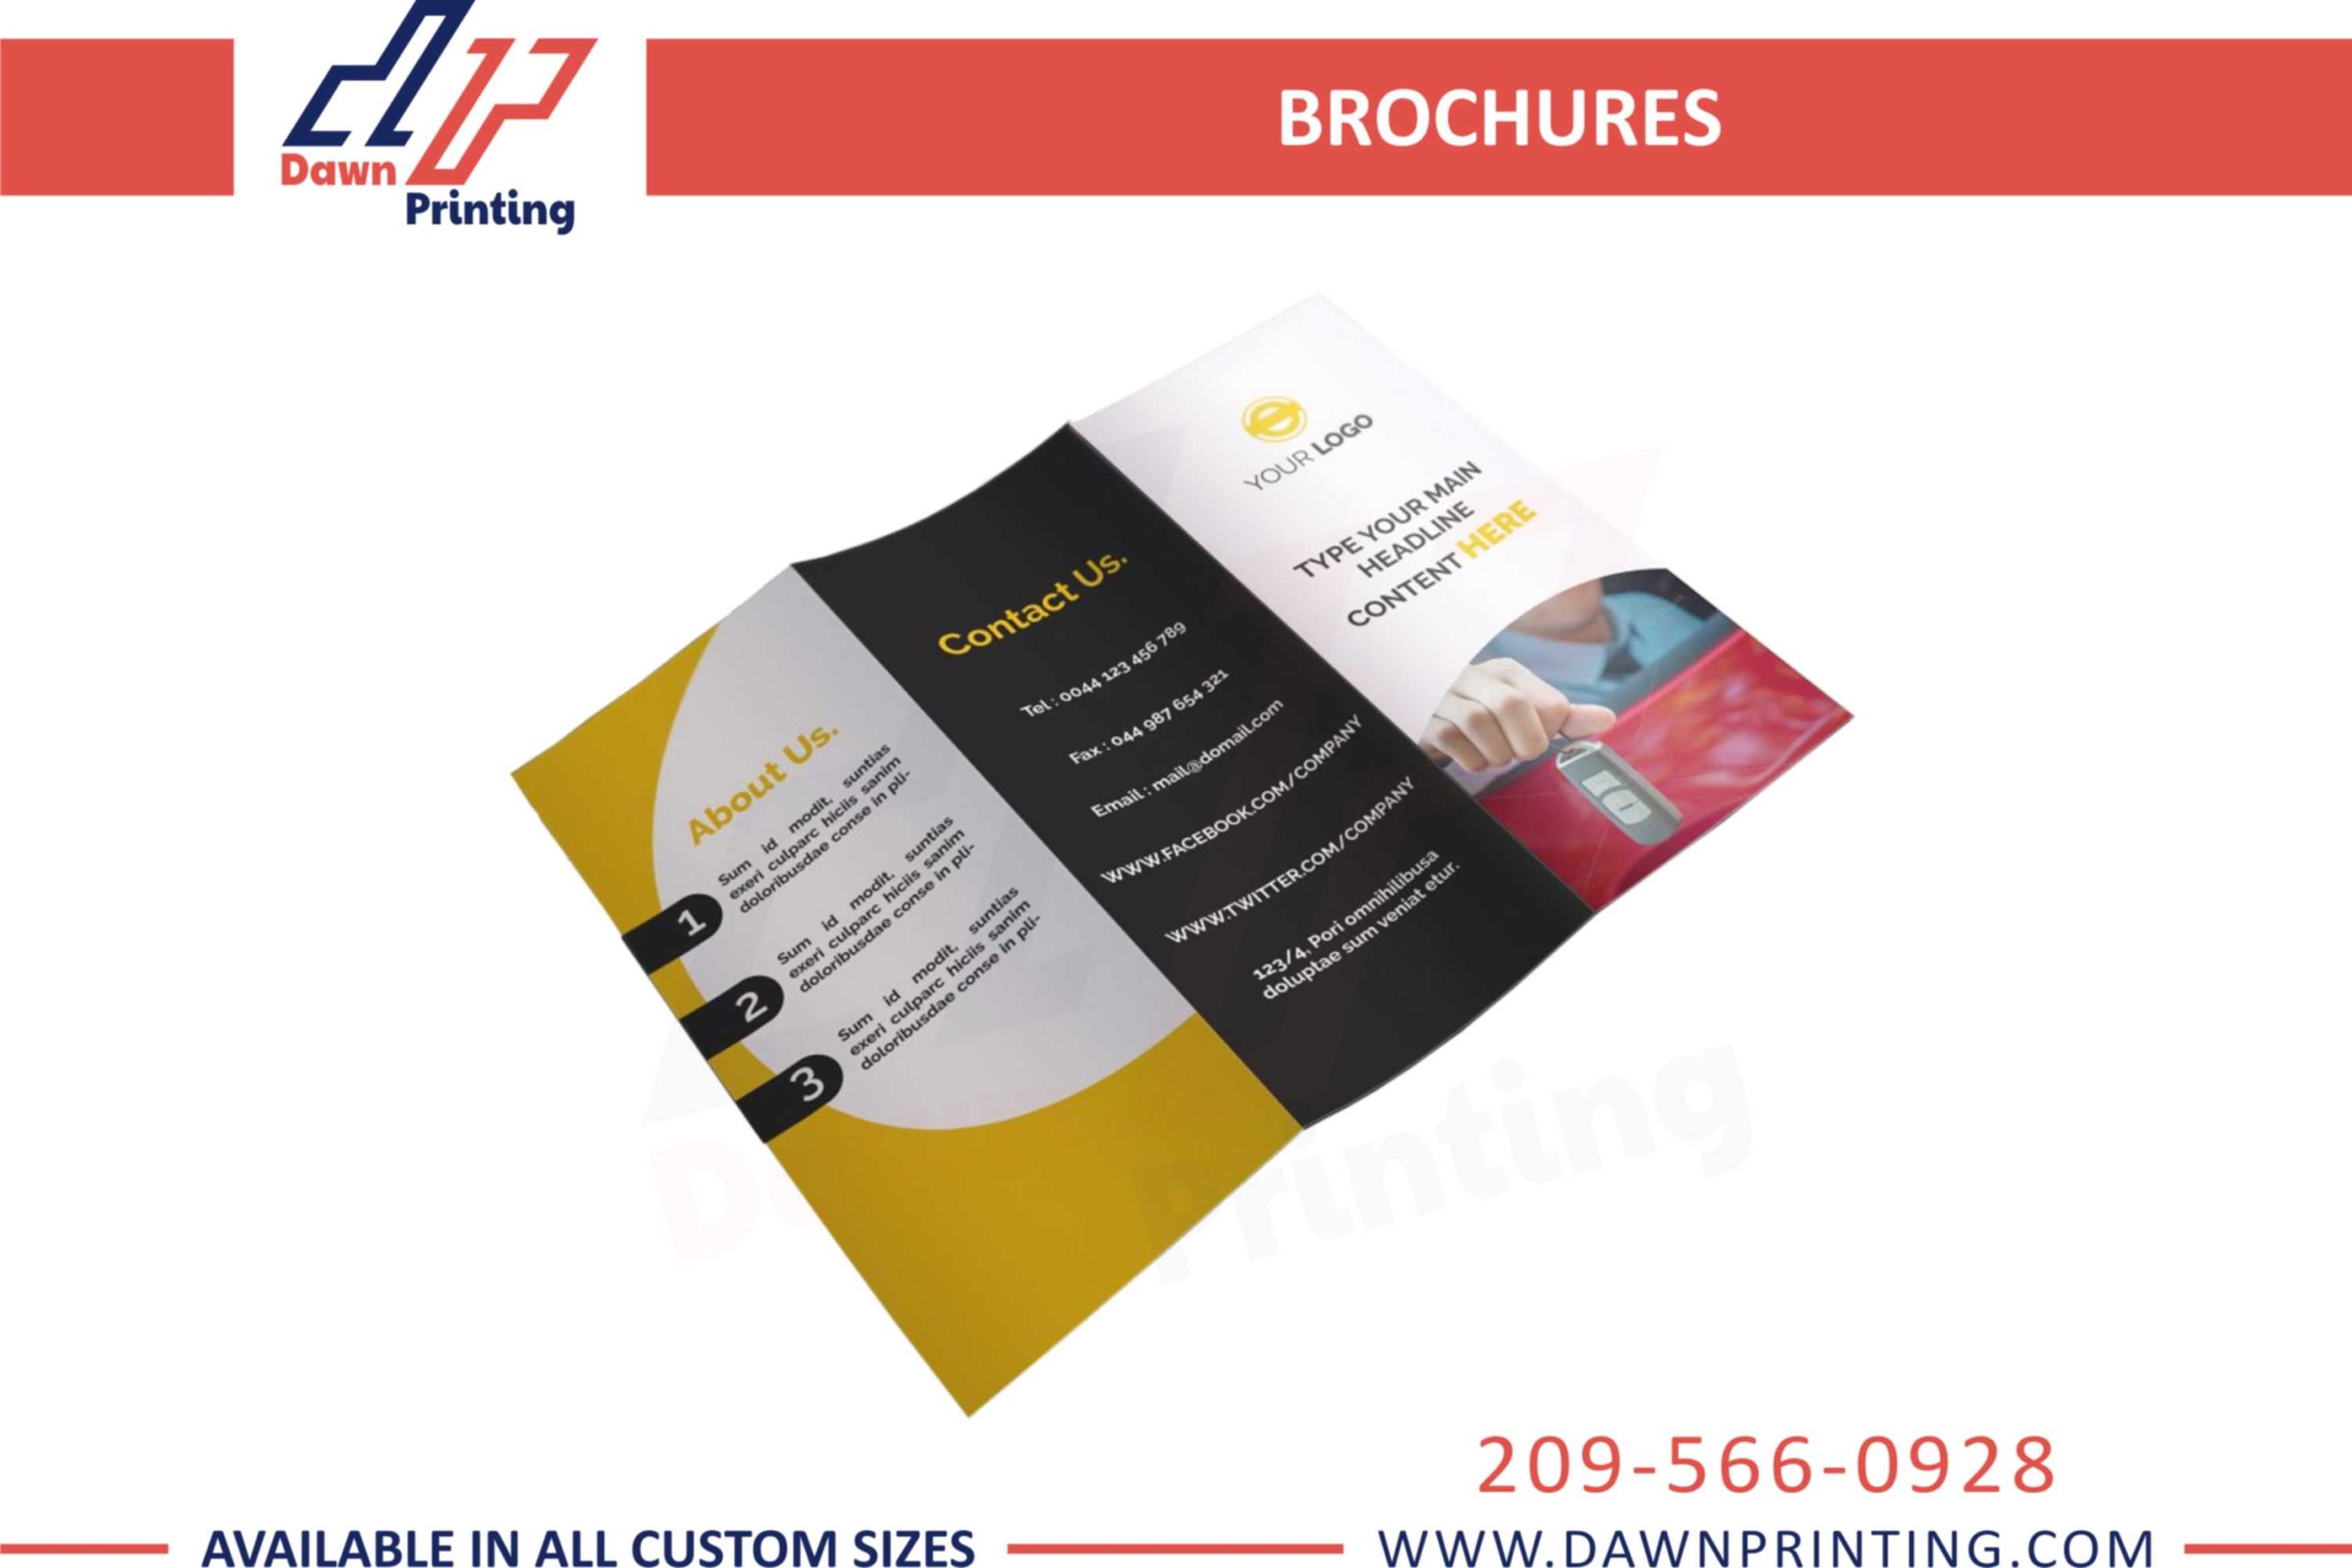 Professional Services Brochures - Dawn Printting